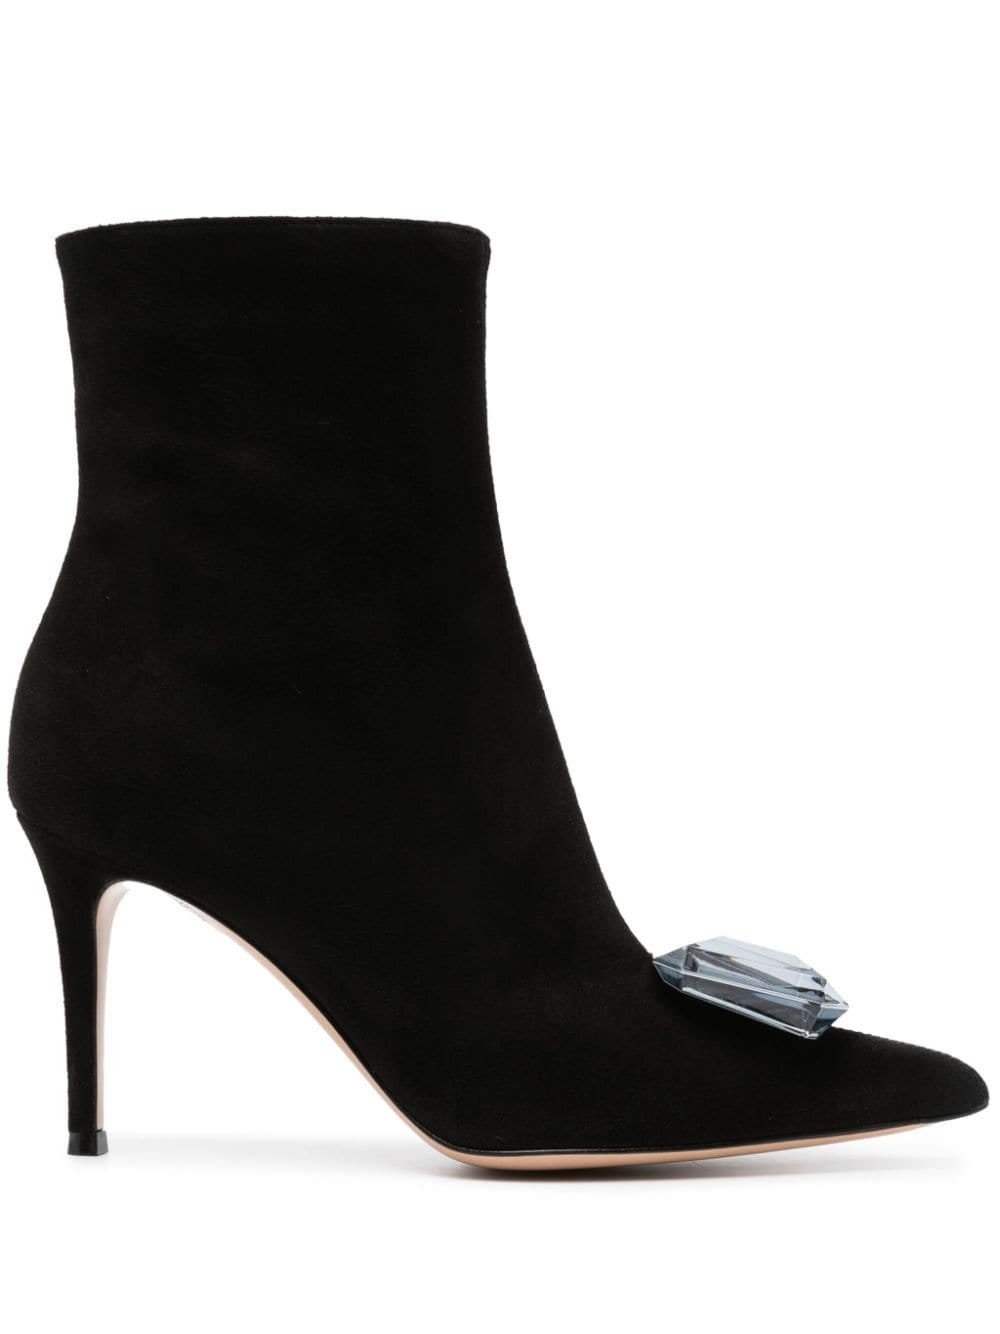 GIANVITO ROSSI JAIPUR BLACK 85MM ANKLE BOOTS